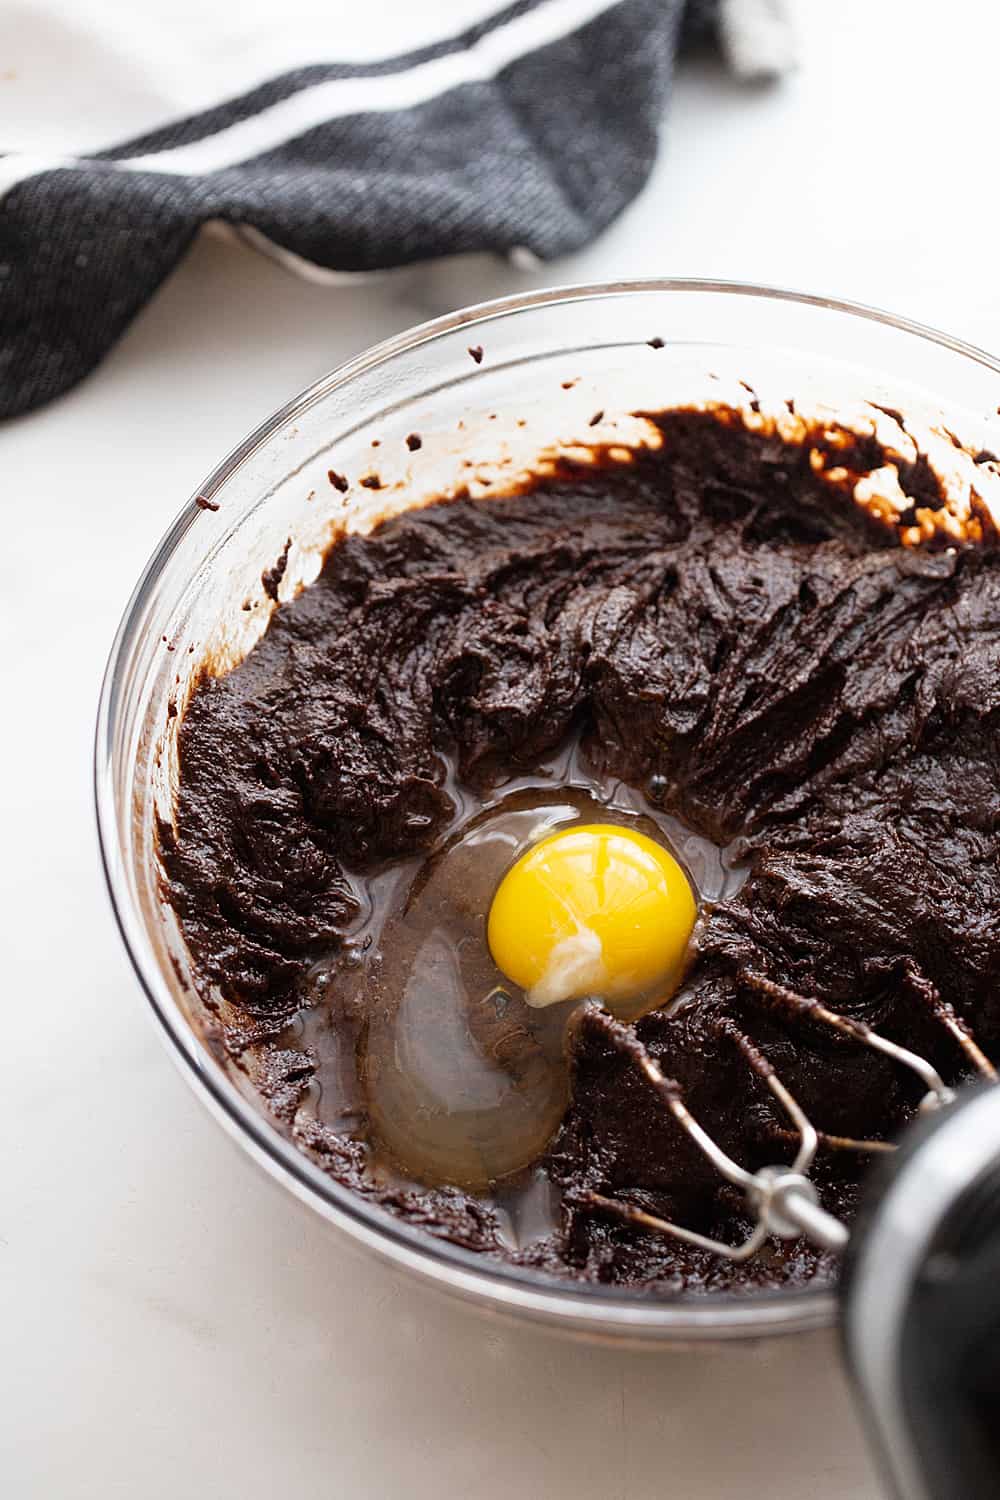 Adding an egg to the Decadent Double Chocolate Crinkle Cookie batter